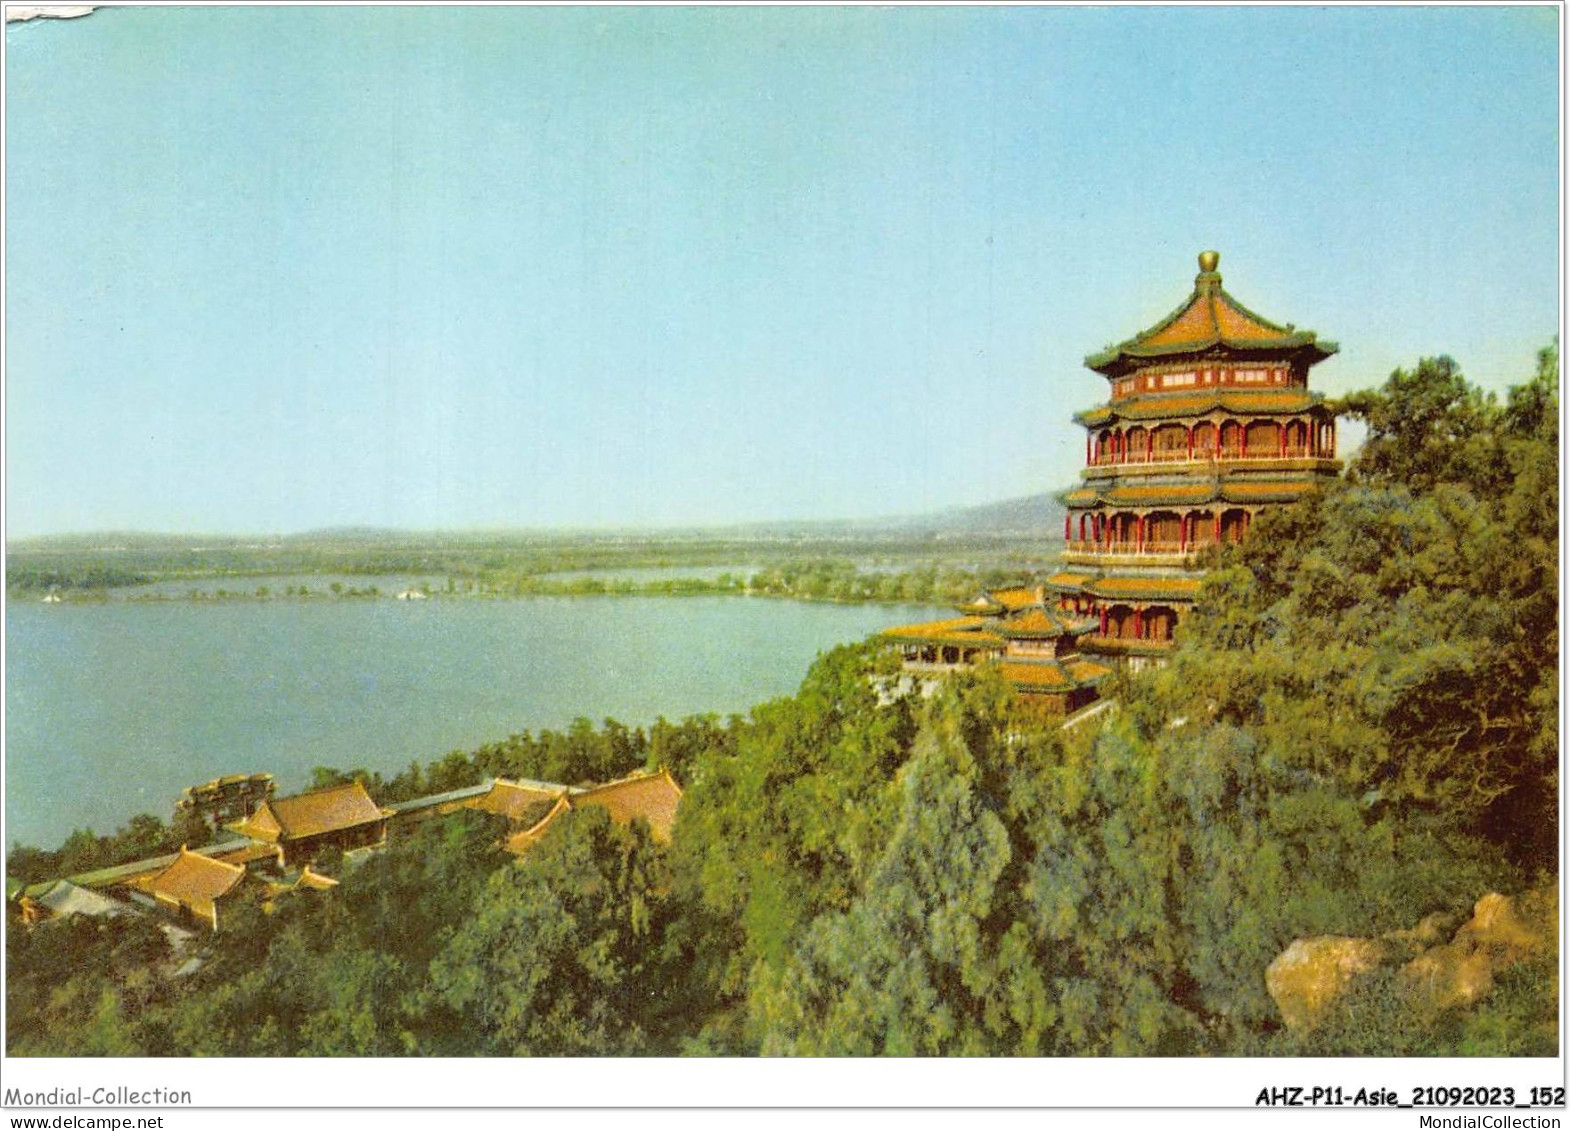 AHZP11-CHINE-1054 - LONGEVITY HILL - SUMMER PALACE - Chine